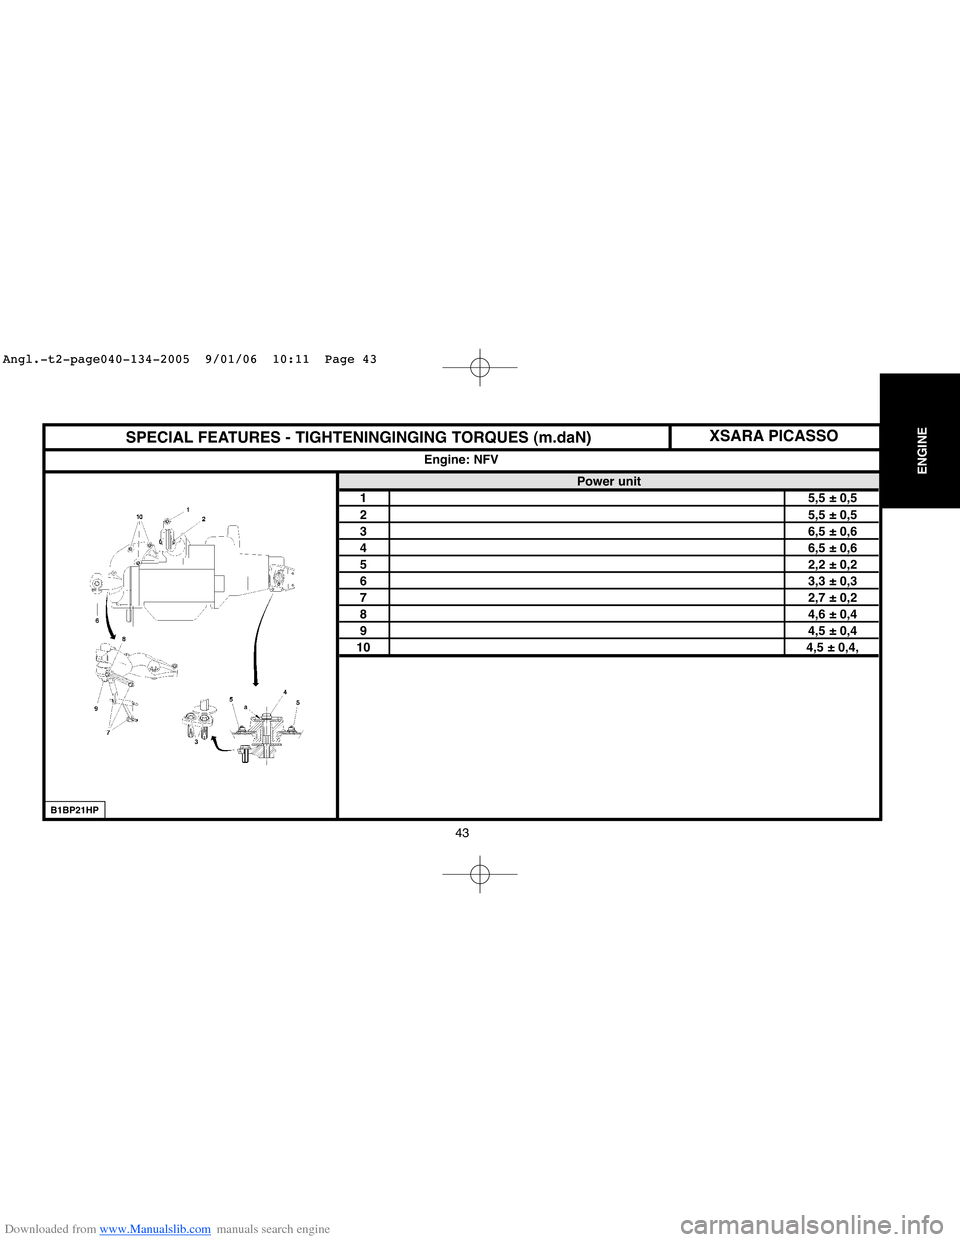 Citroen C4 2005 2.G Service Manual Downloaded from www.Manualslib.com manuals search engine 43
ENGINE
SPECIAL FEATURES - TIGHTENINGINGING TORQUES (m.daN)
Power unit
15,5 ± 0,5
25,5 ± 0,5
36,5 ± 0,6
46,5 ± 0,6
52,2 ± 0,2
63,3 ± 0,